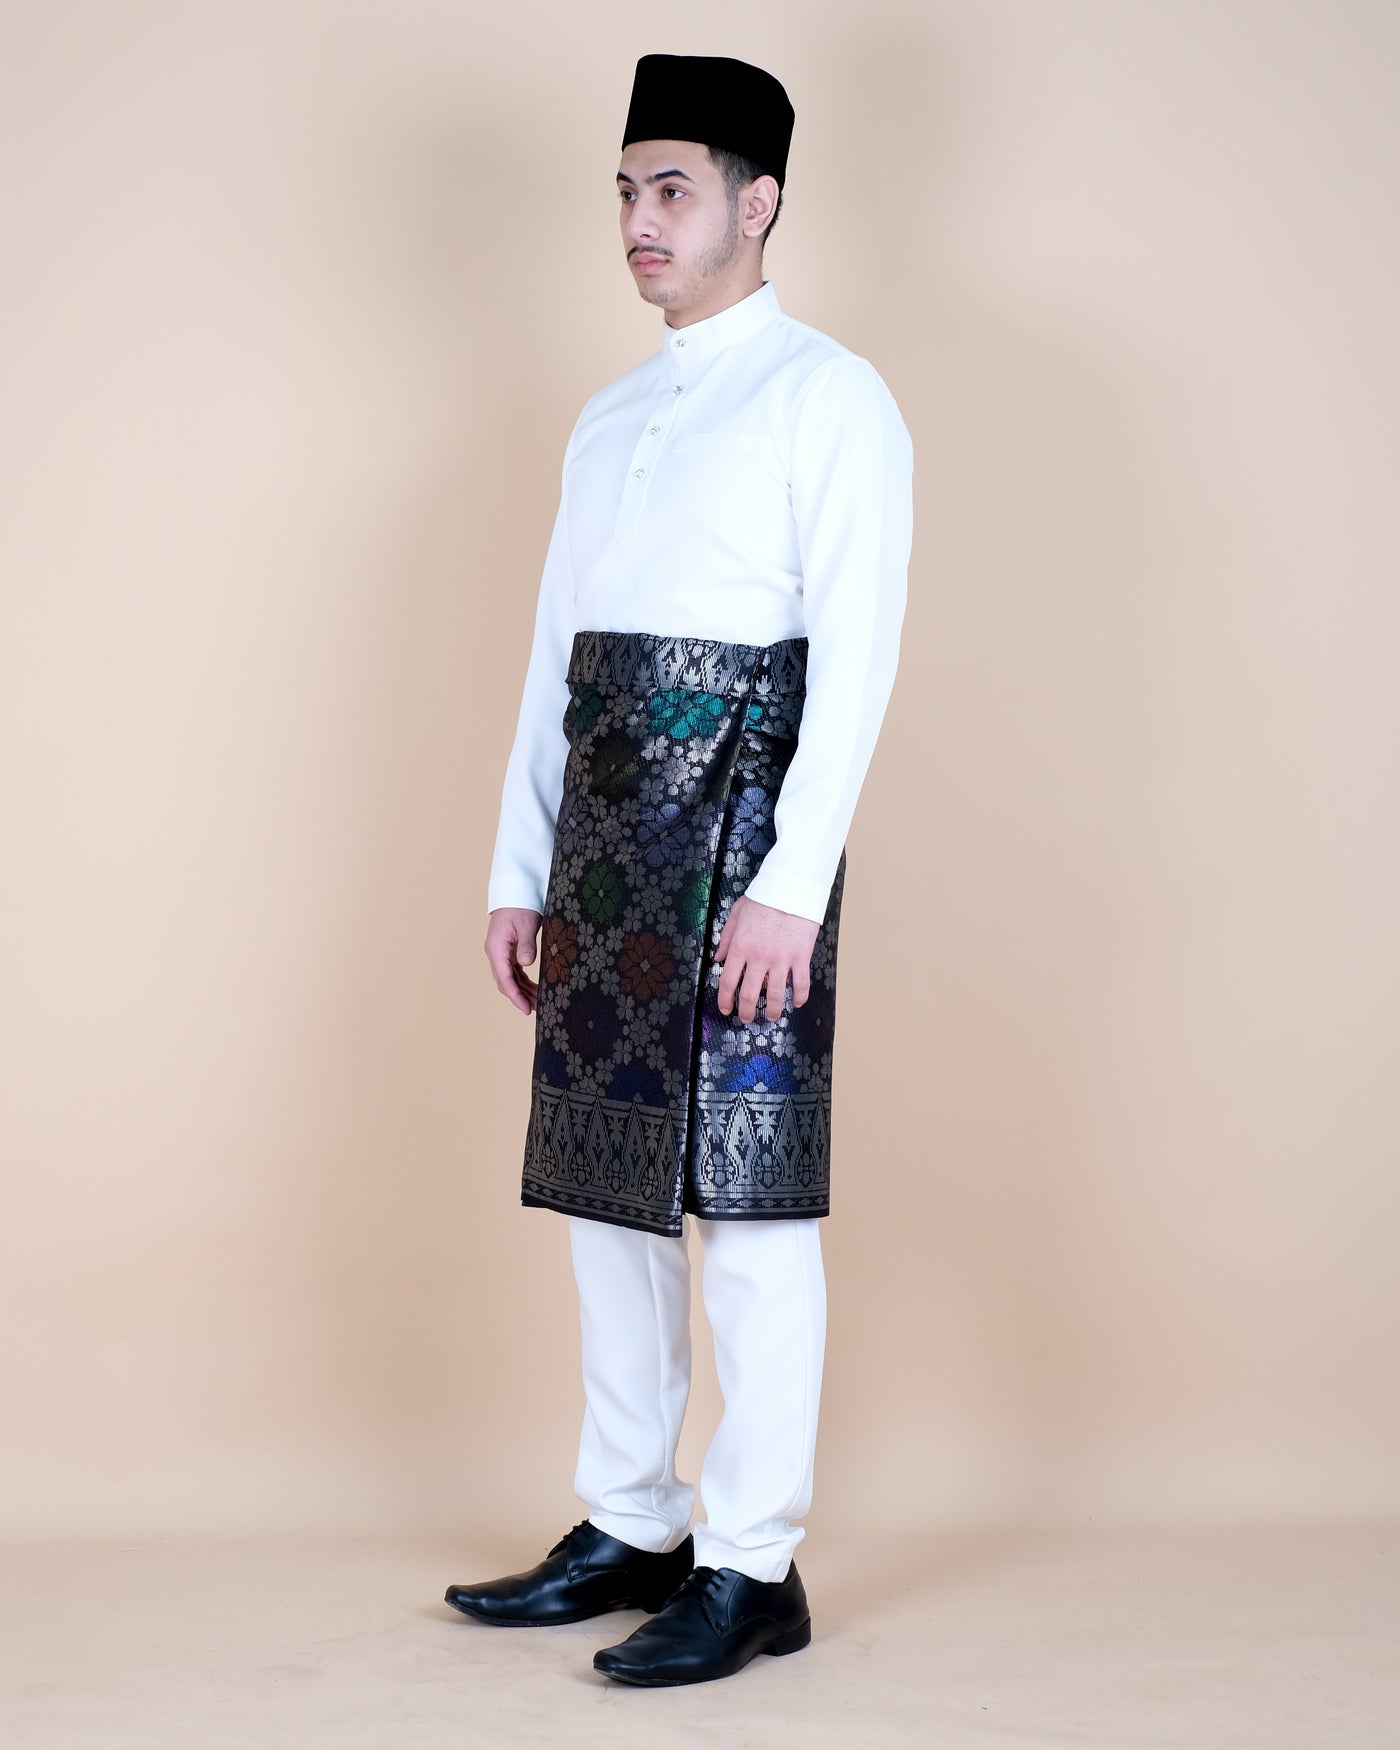 Songket Instant - Black Silver (SI 33)